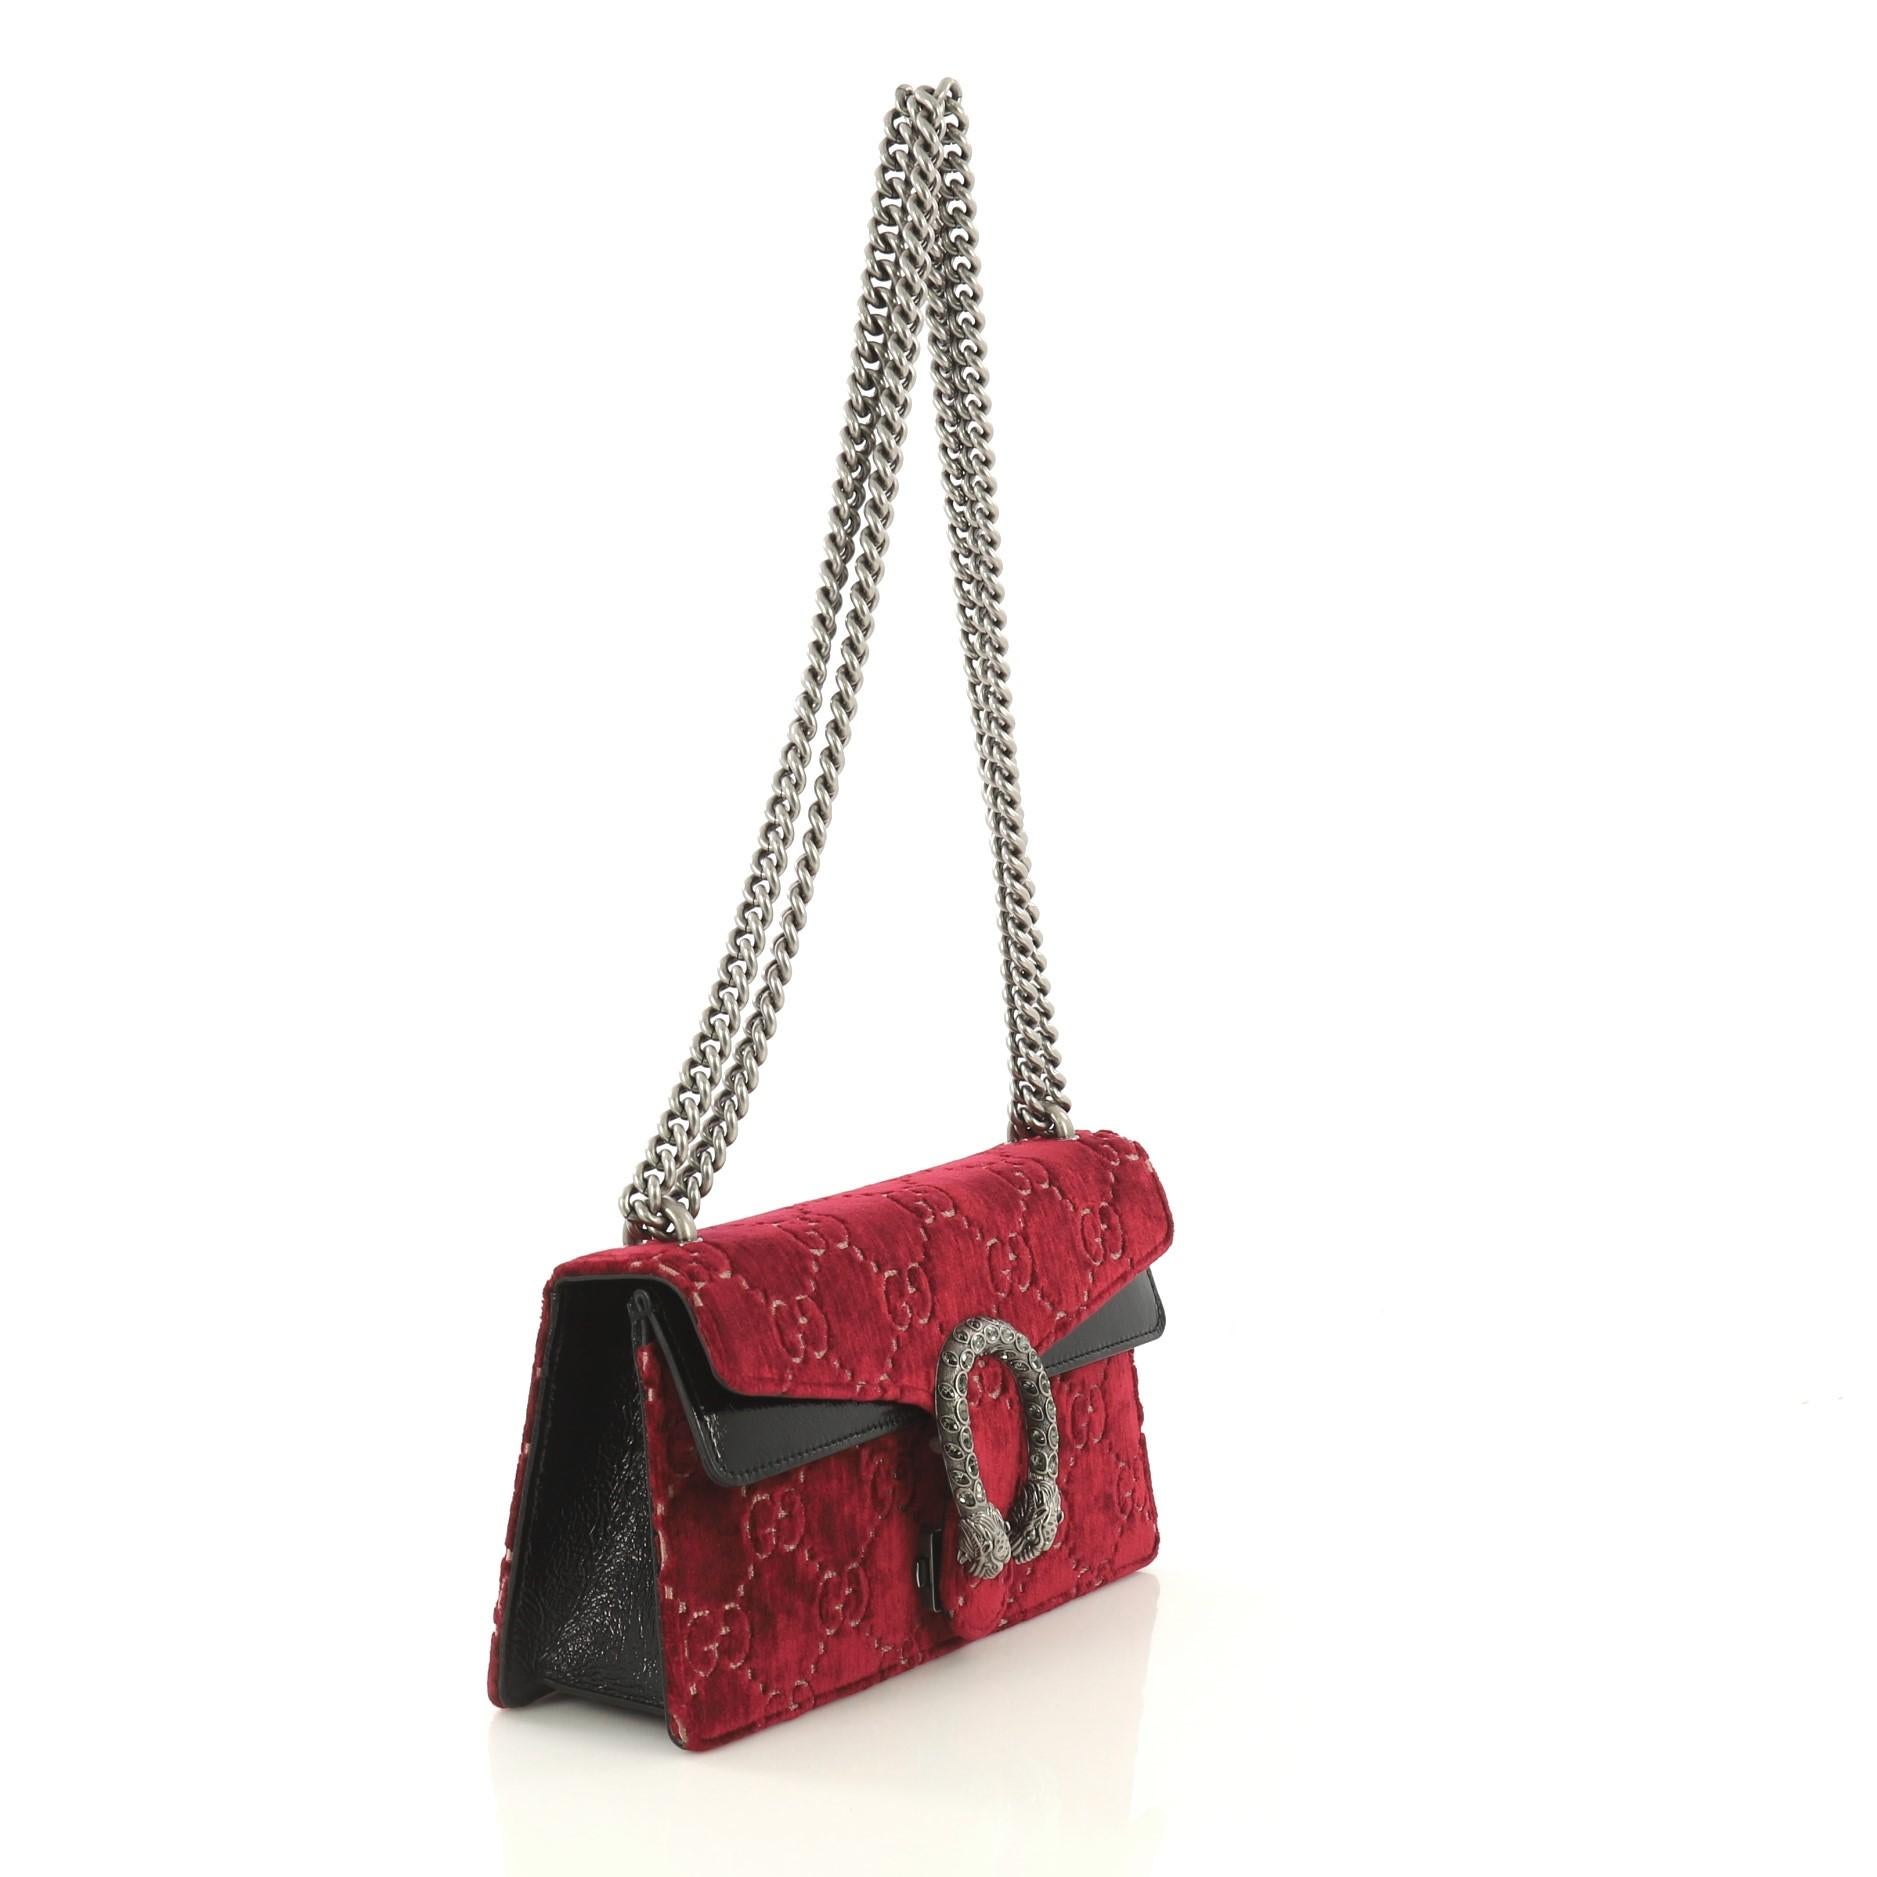 This Gucci Dionysus Bag GG Velvet Mini, crafted from red GG velvet, features chain link strap, textured tiger head spur detail on its flap, and aged silver-tone hardware. Its hidden push-pin closure opens to a neutral microfiber interior.